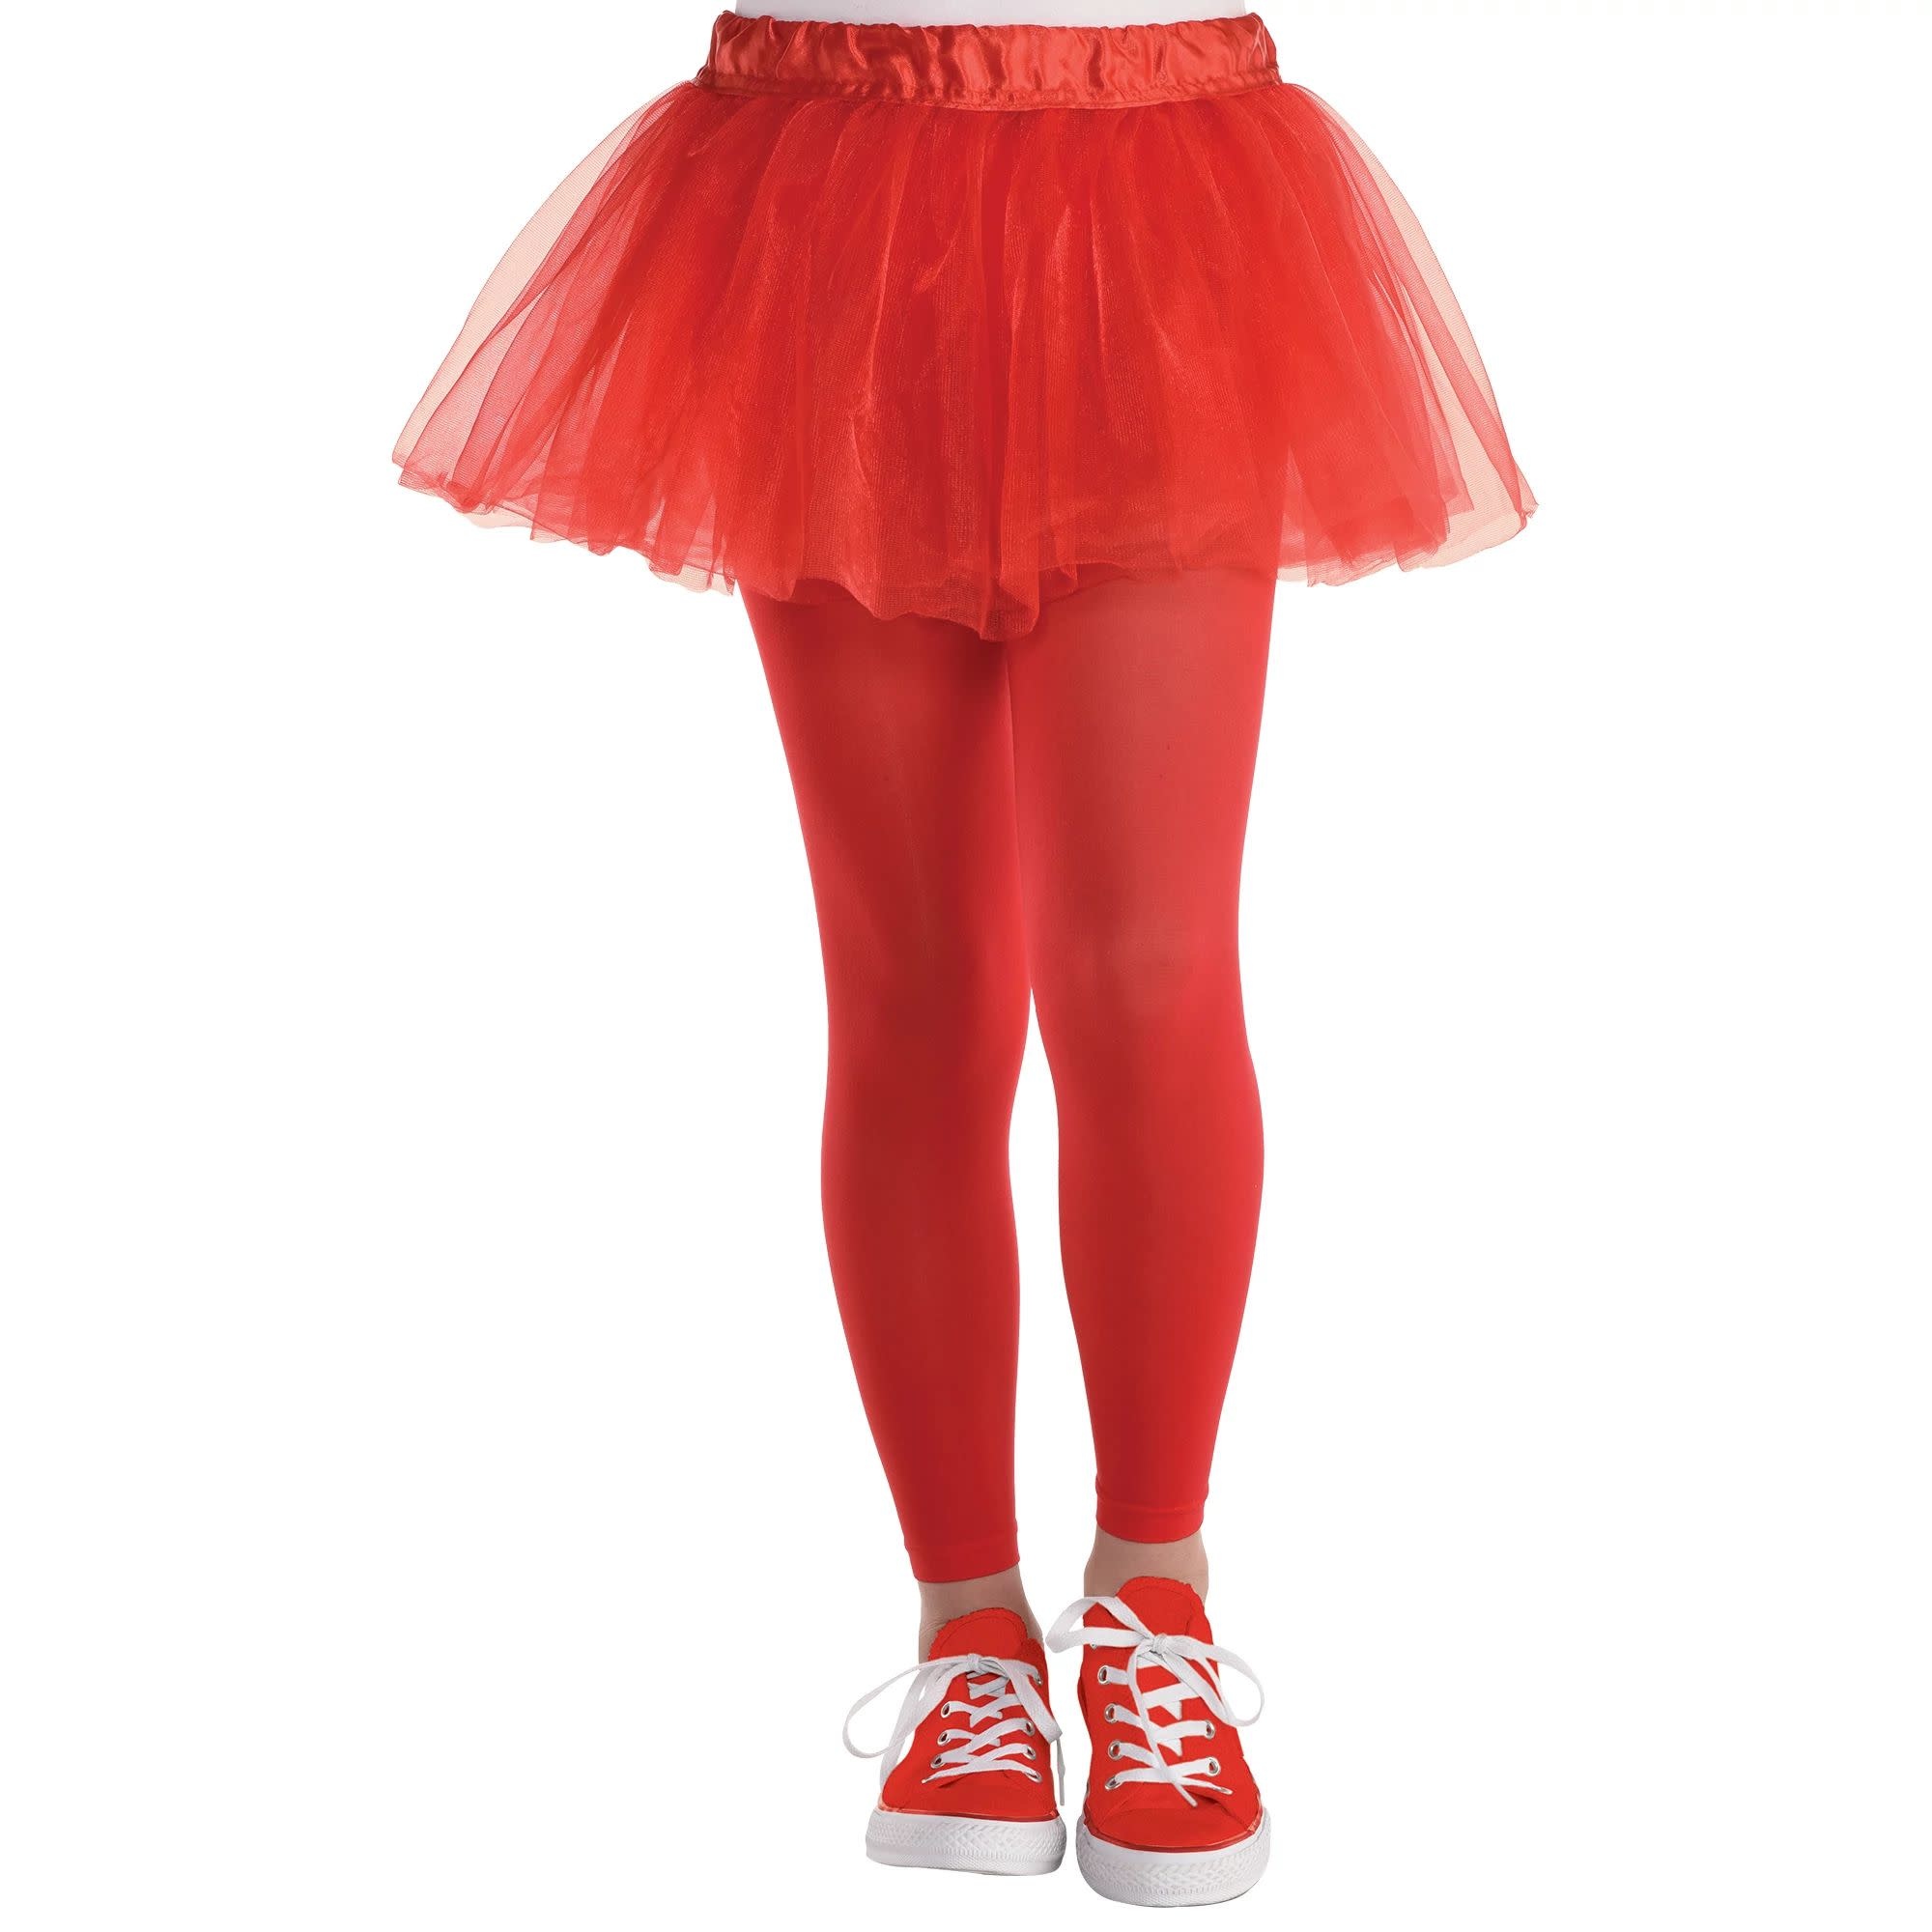 Red Footless Tights - Child